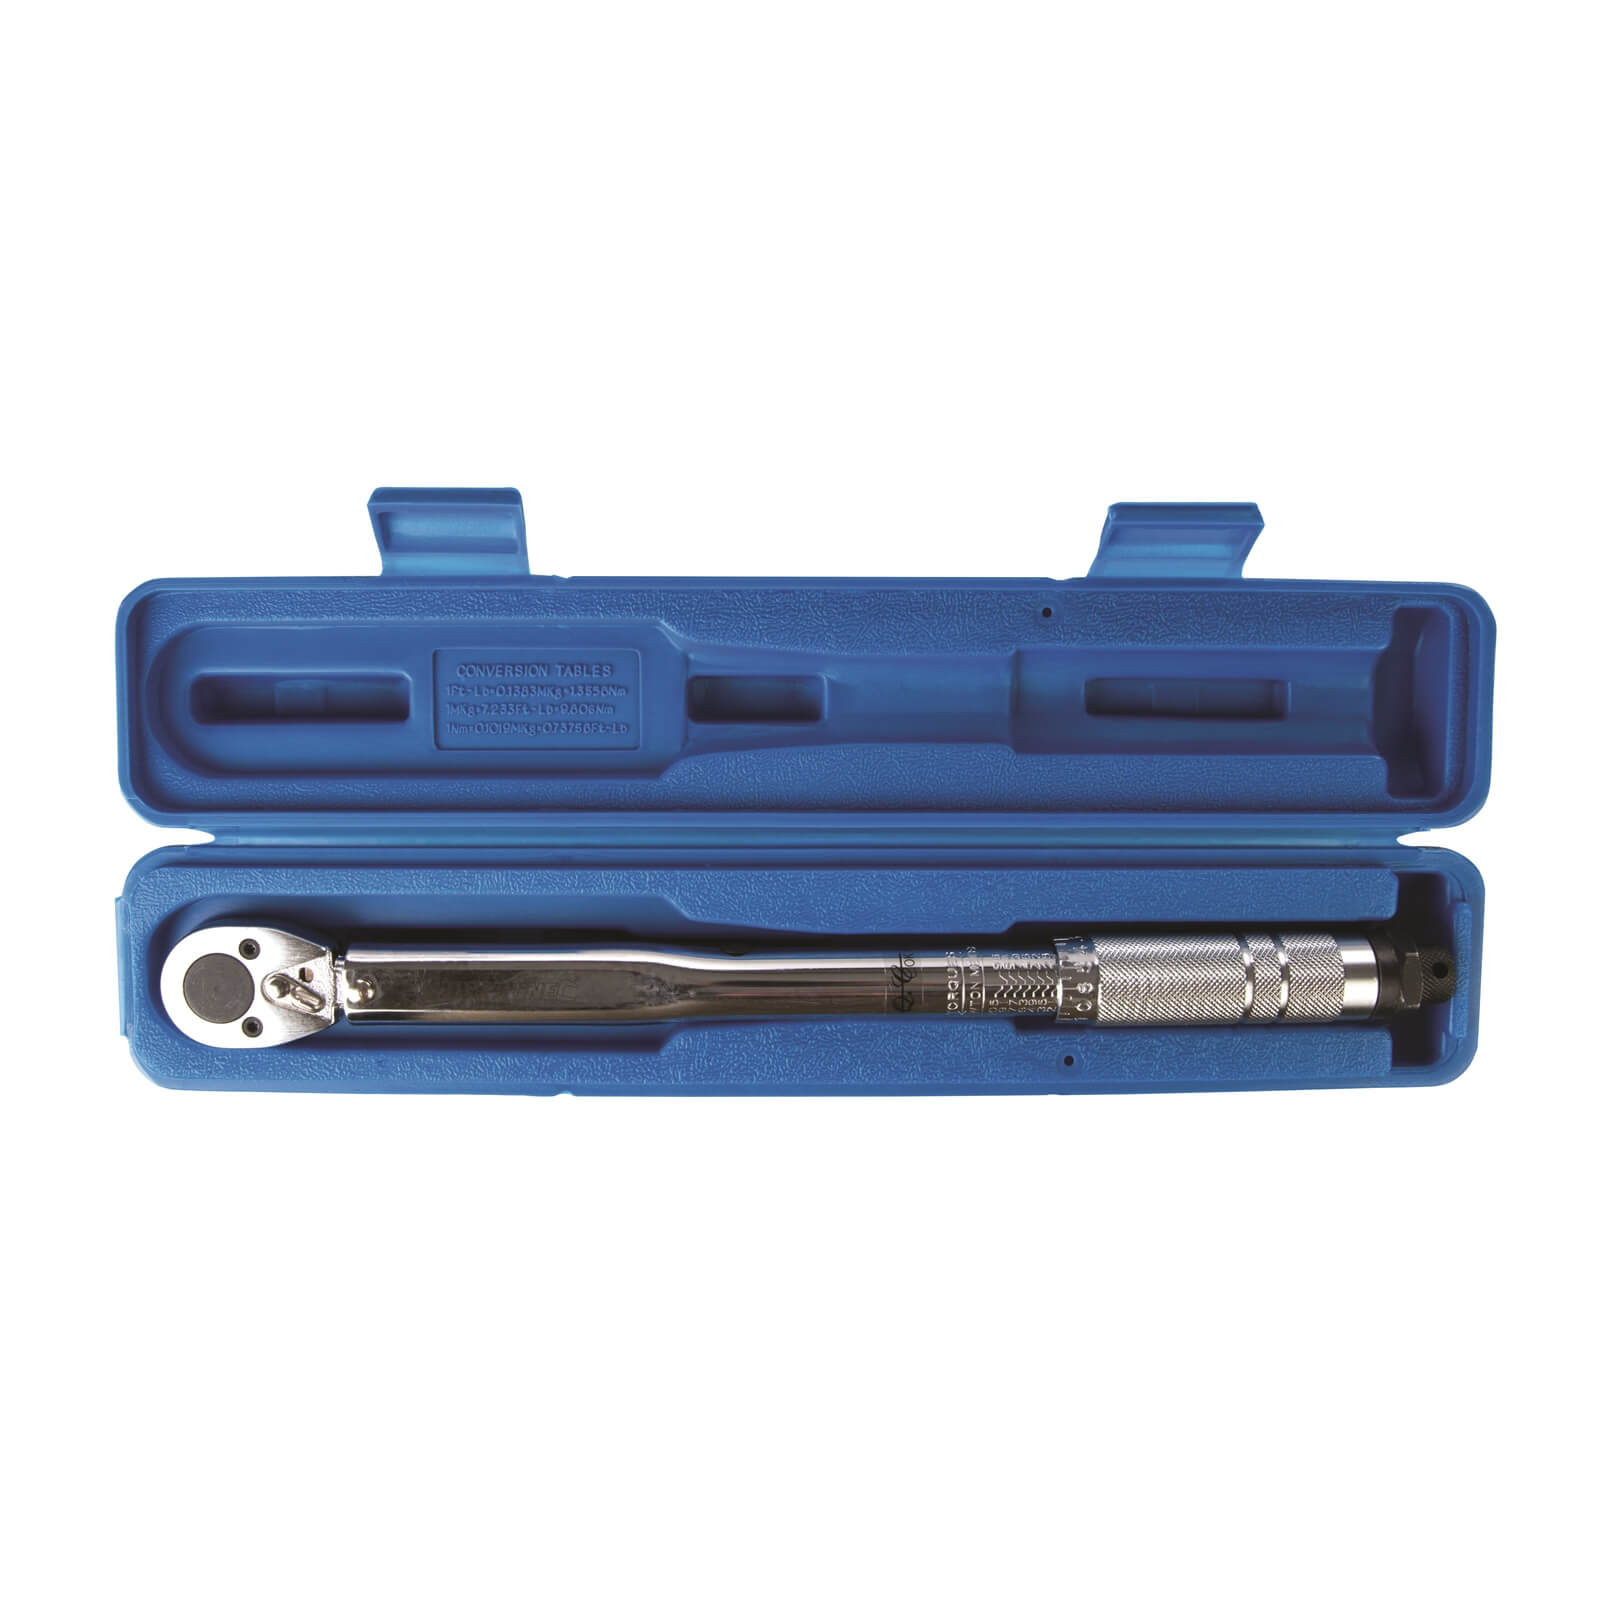 Silverline Torque Wrench 8 - 105Nm 3/8 Drive